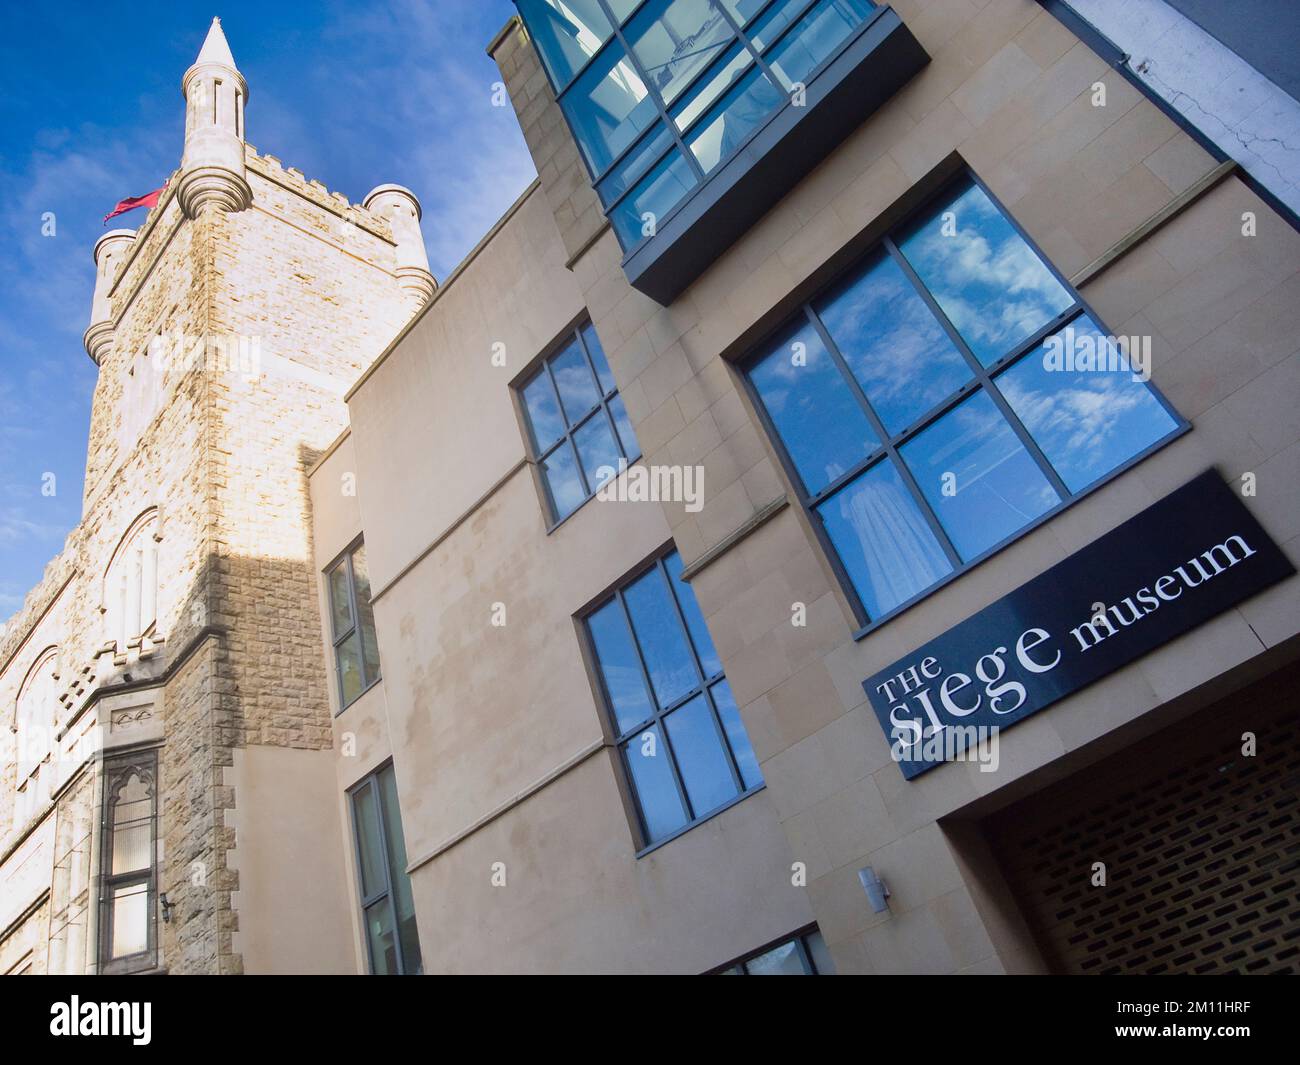 Ireland, North, Derry City, The Siege Museum in Society Street. Stock Photo